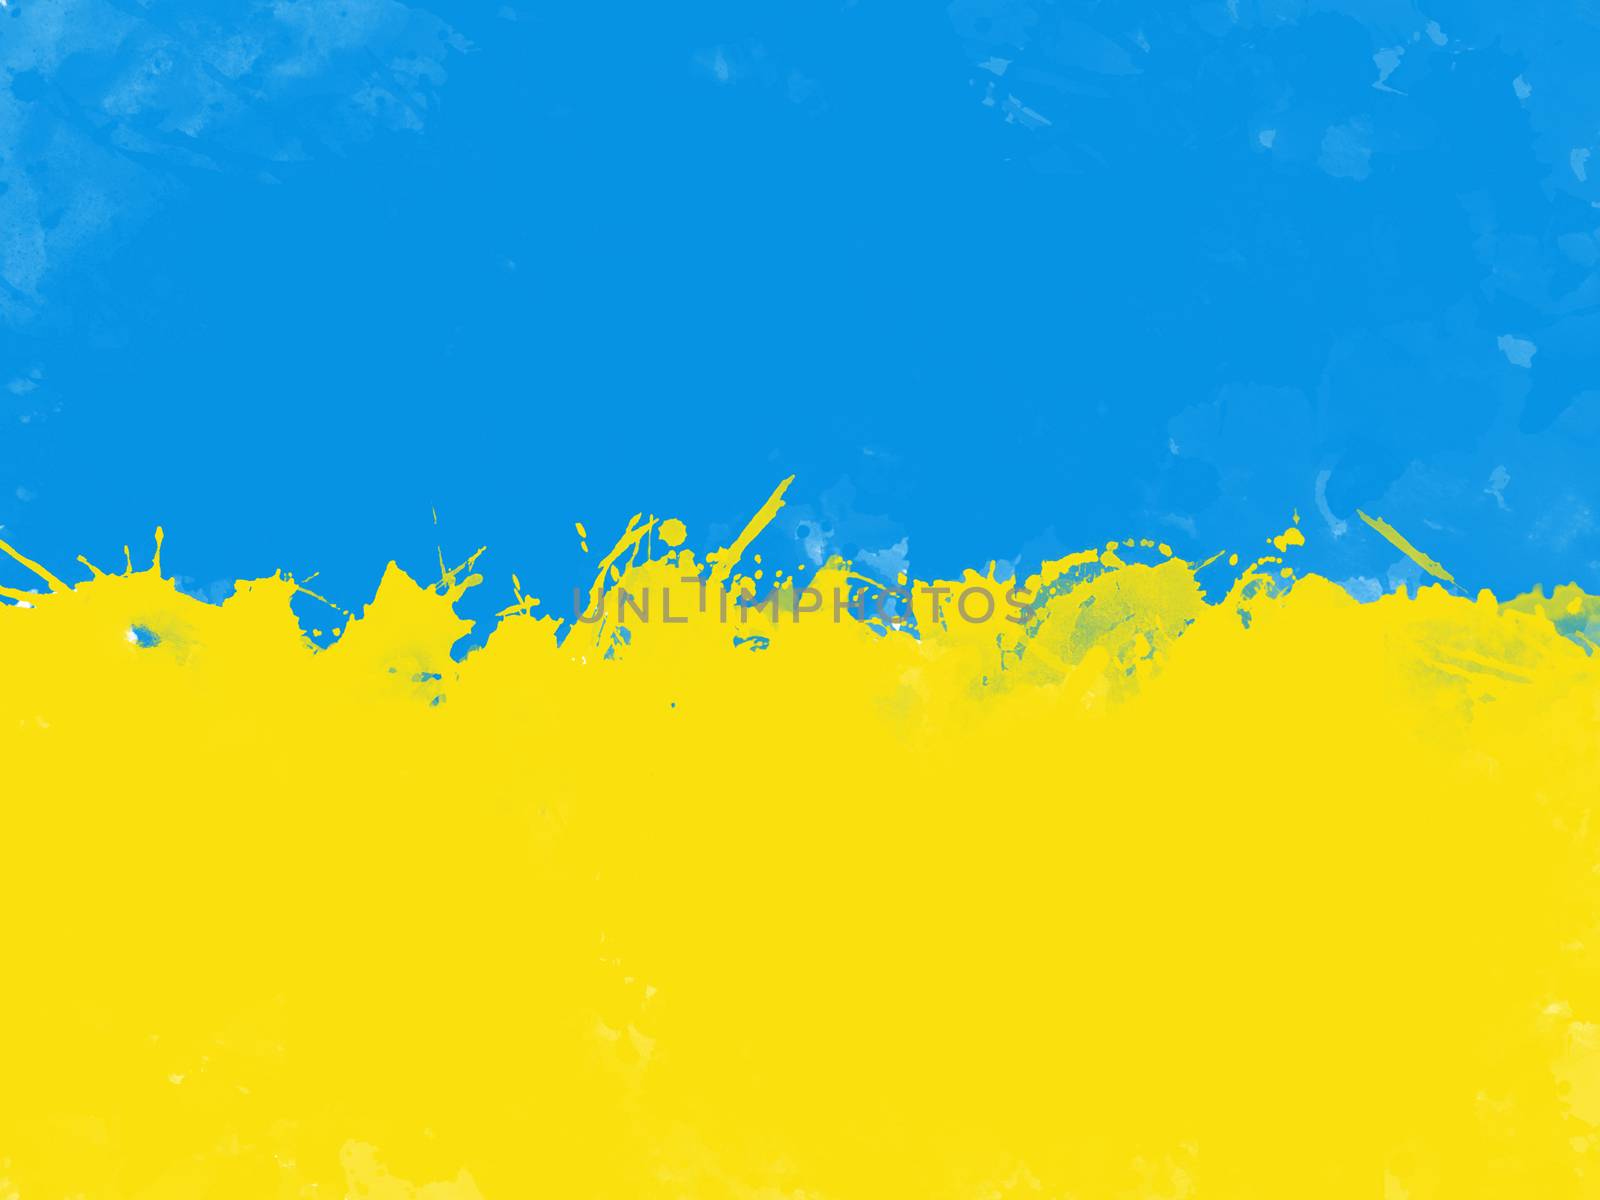 Flag of Ukraine by watercolor paint brush, grunge style